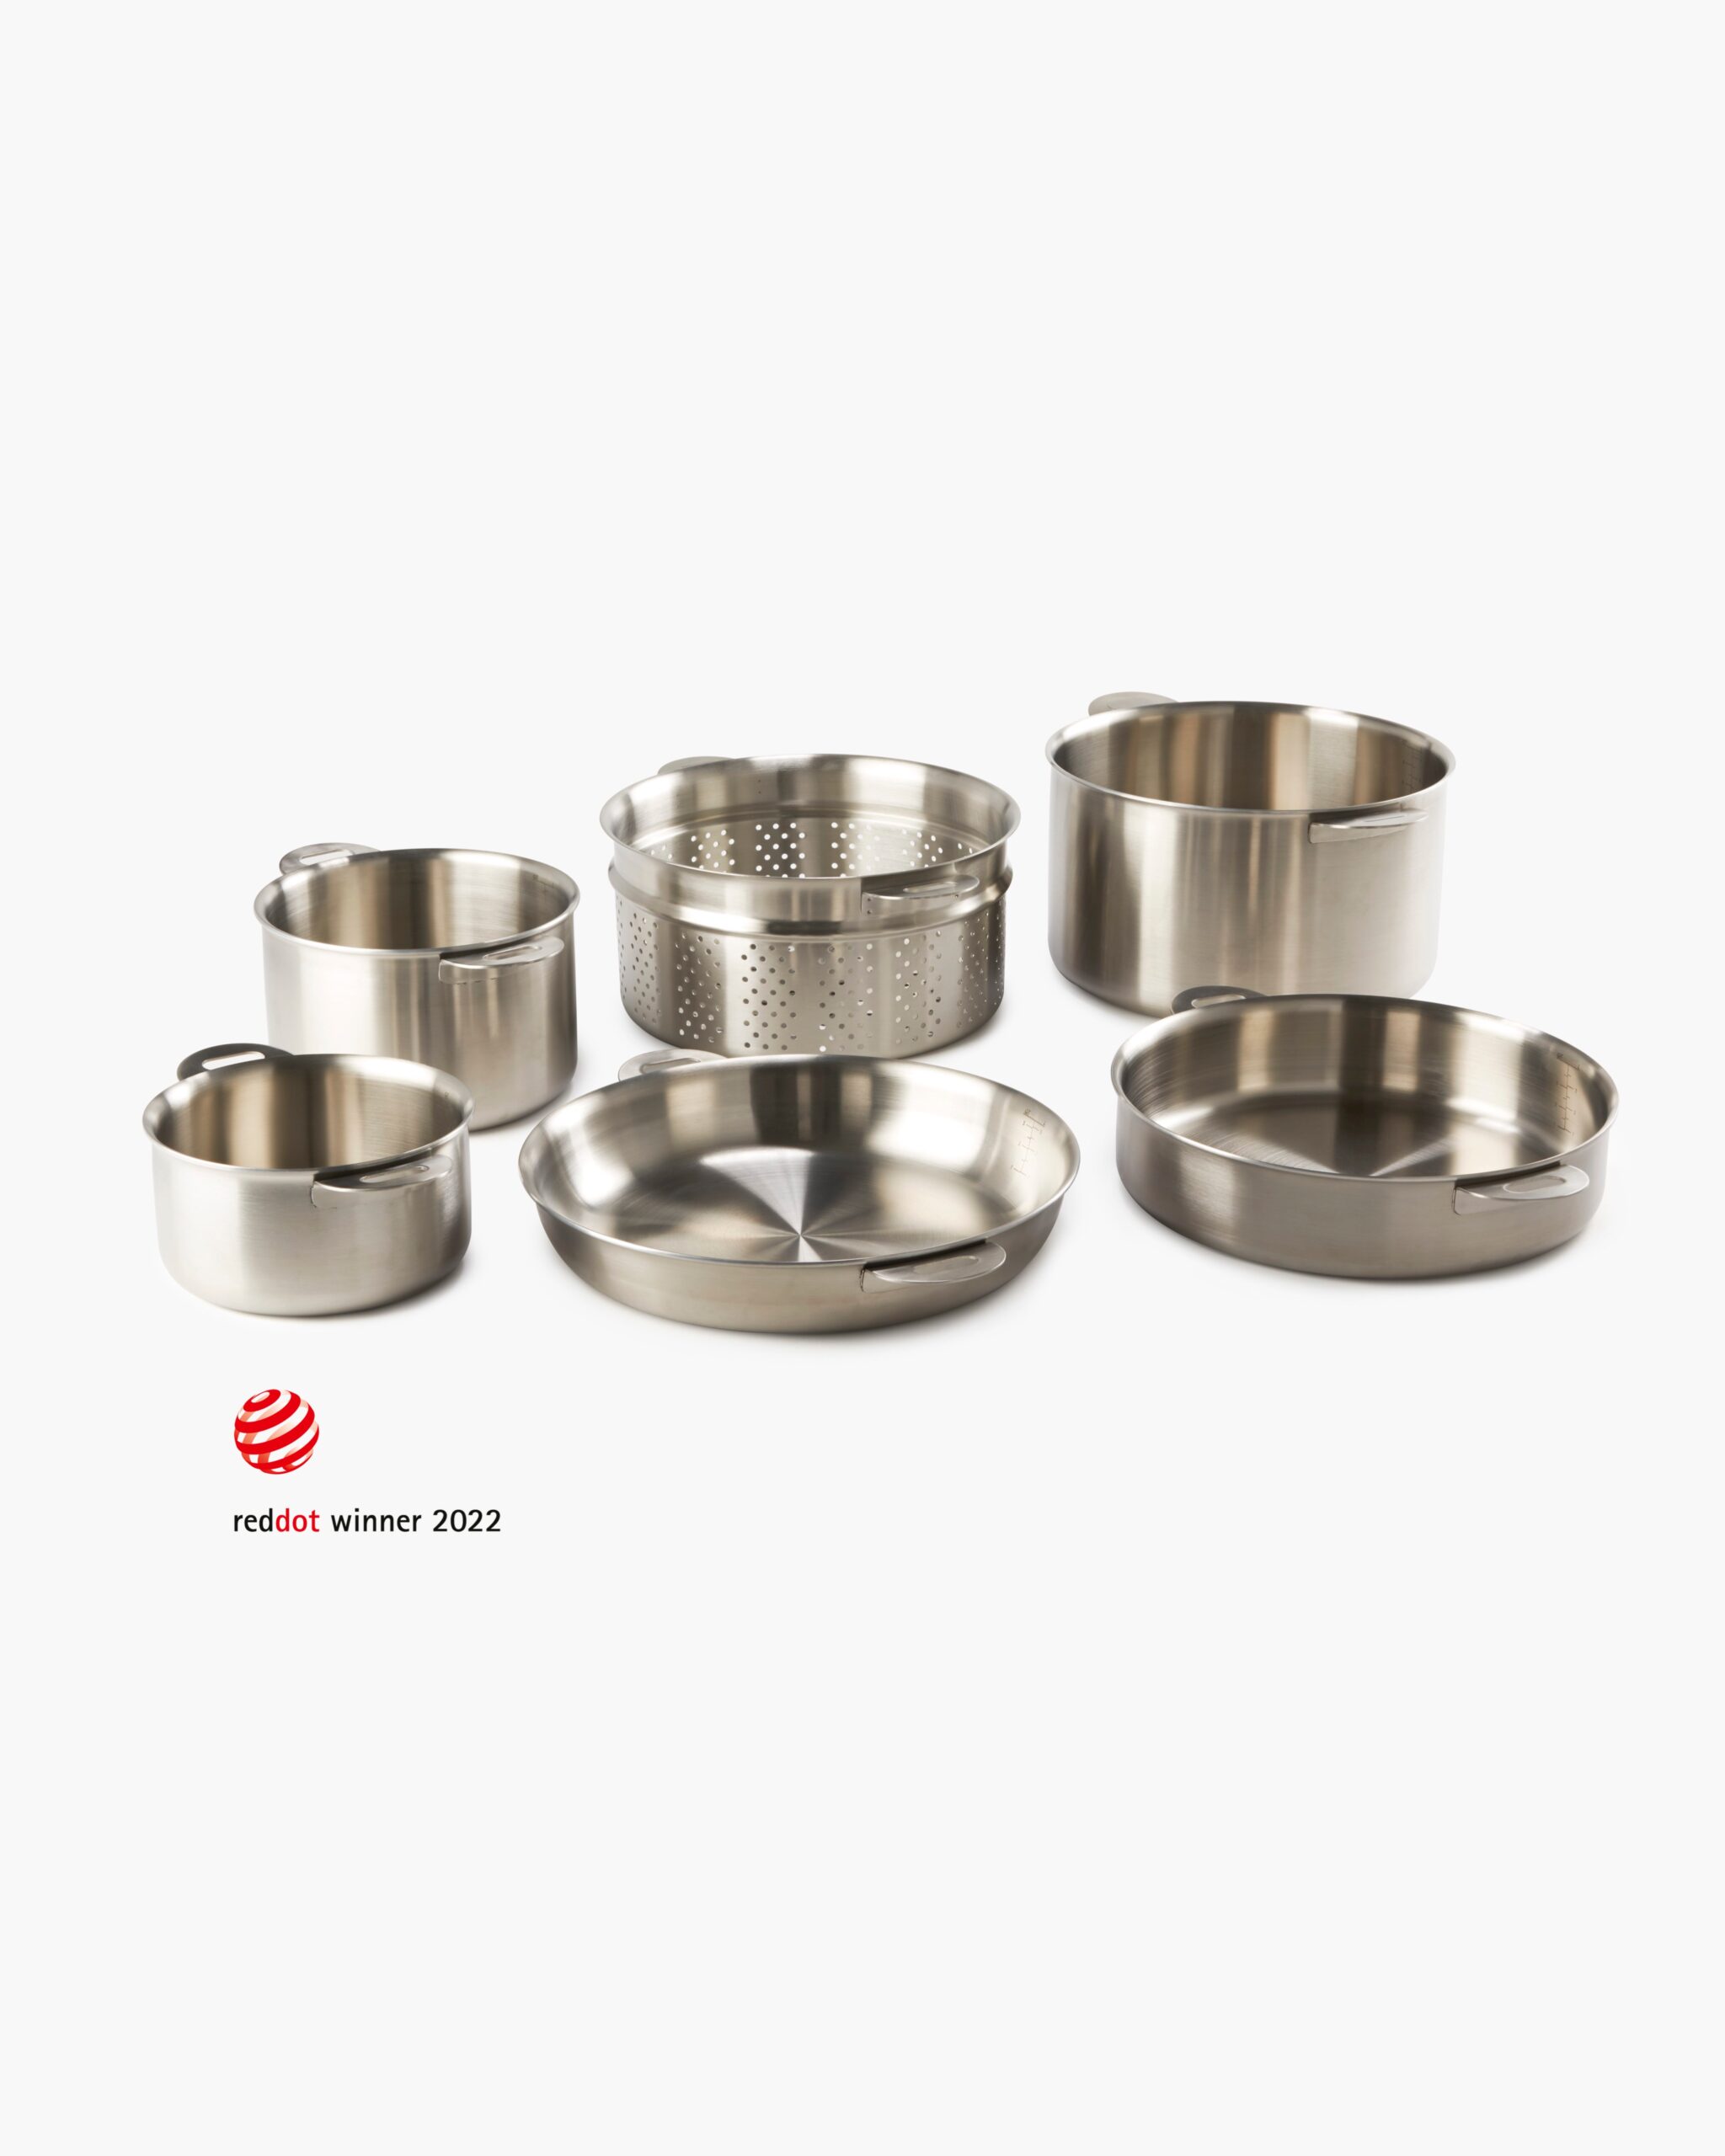 Shop ENSEMBL Stainless Steel Fully Clad Stacking Cookware Set with removable handles. Frying Pan, Braiser Pan, Small Saucepan, Medium Saucepan, Stockpot, Steamer/Colander. Multifunctional, long-lasting, design-forward home wares. Best all purpose cookware set with lid. Perfect cookware set.